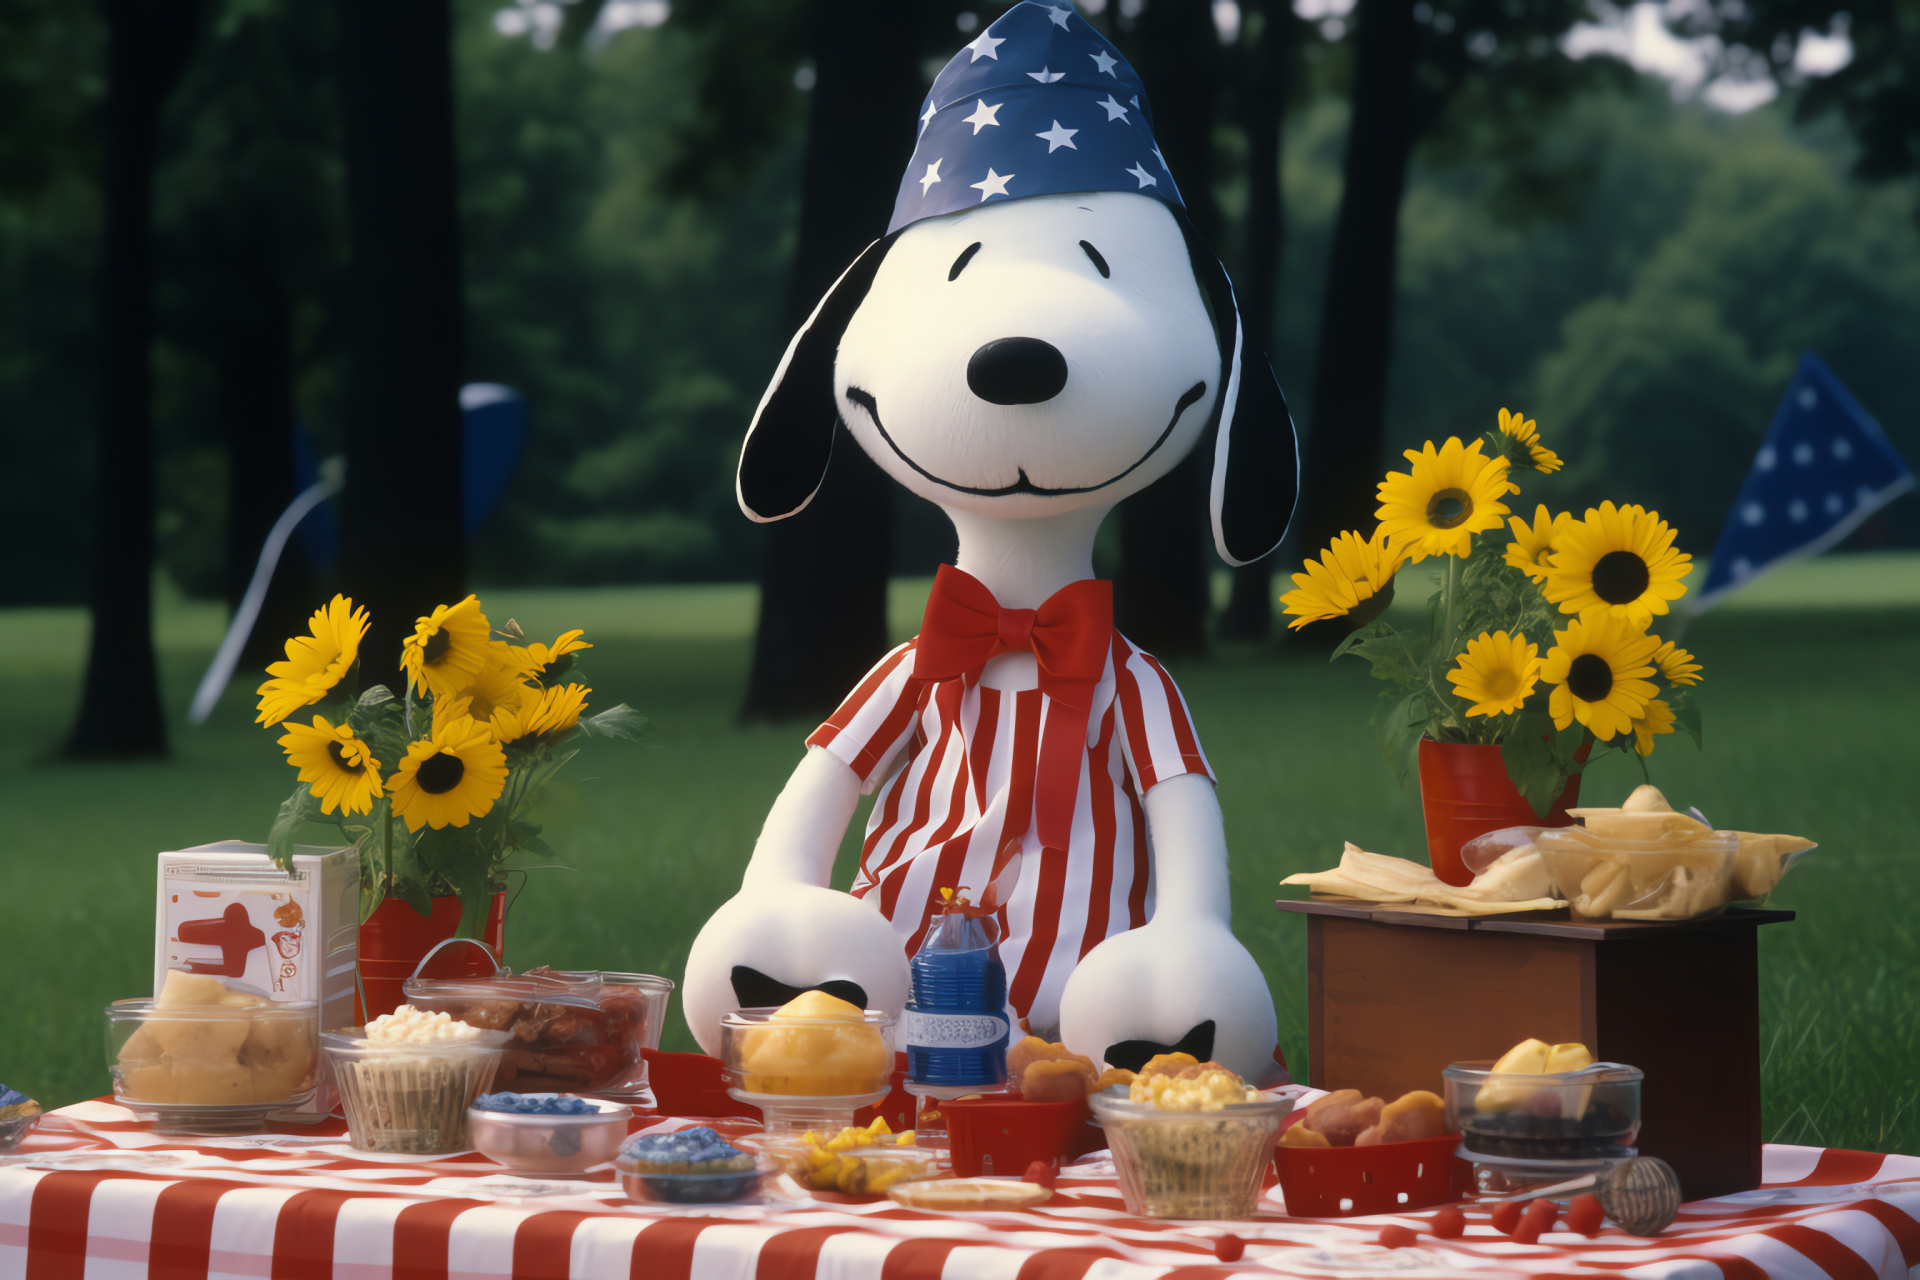 Snoopy summertime leisure, Woodstock companion, July 4th lunch, outdoor gathering, park location, HD Desktop Wallpaper